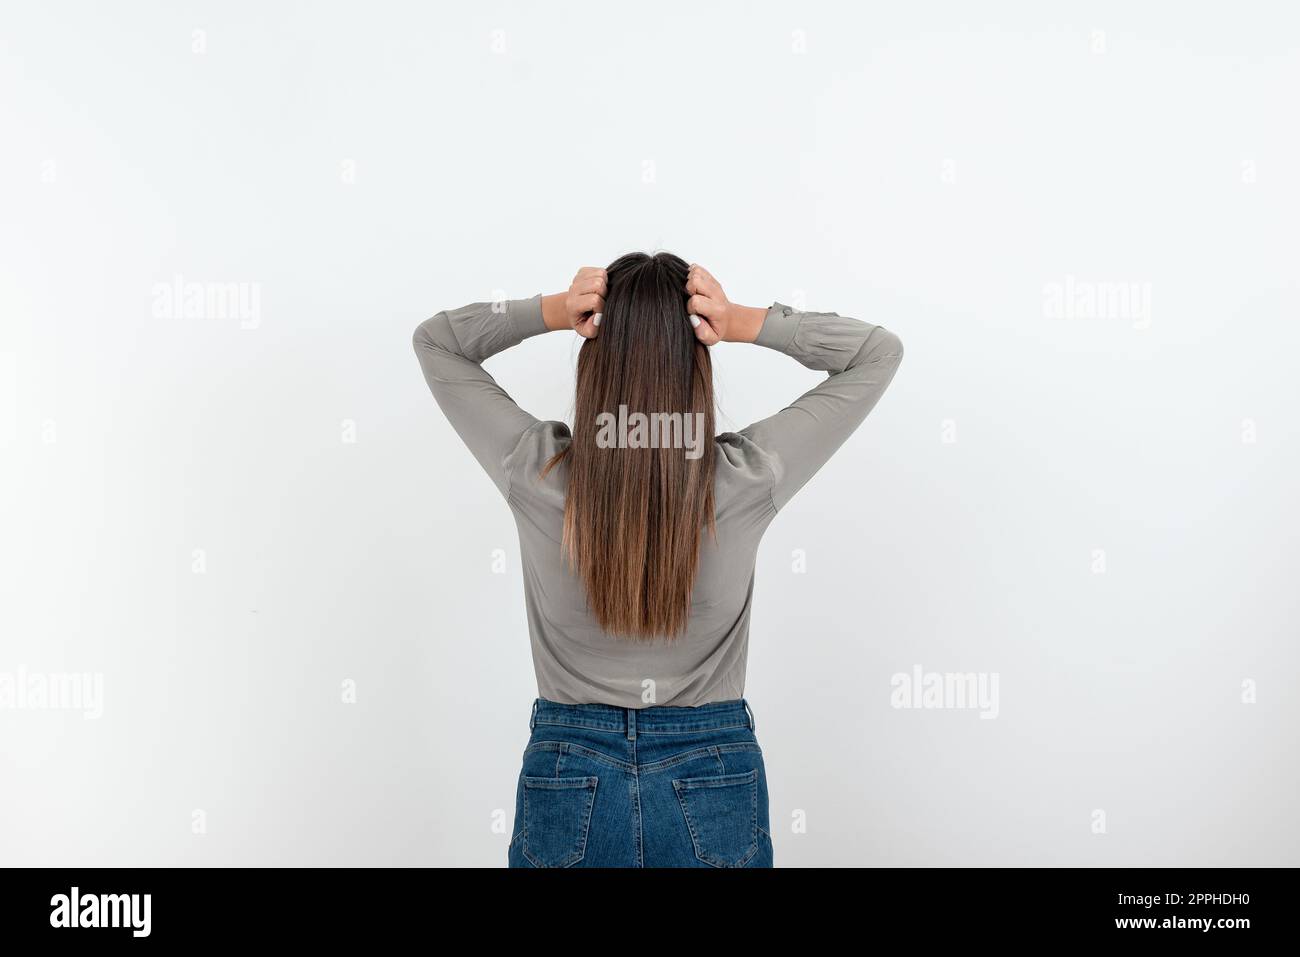 Woman Standing Backwards Coming Up With New Amazing Ideas. Businesswoman Thinking Deeply For Old Wonderful Plans. Guy Brain Storming Brilliant Strategies. Stock Photo